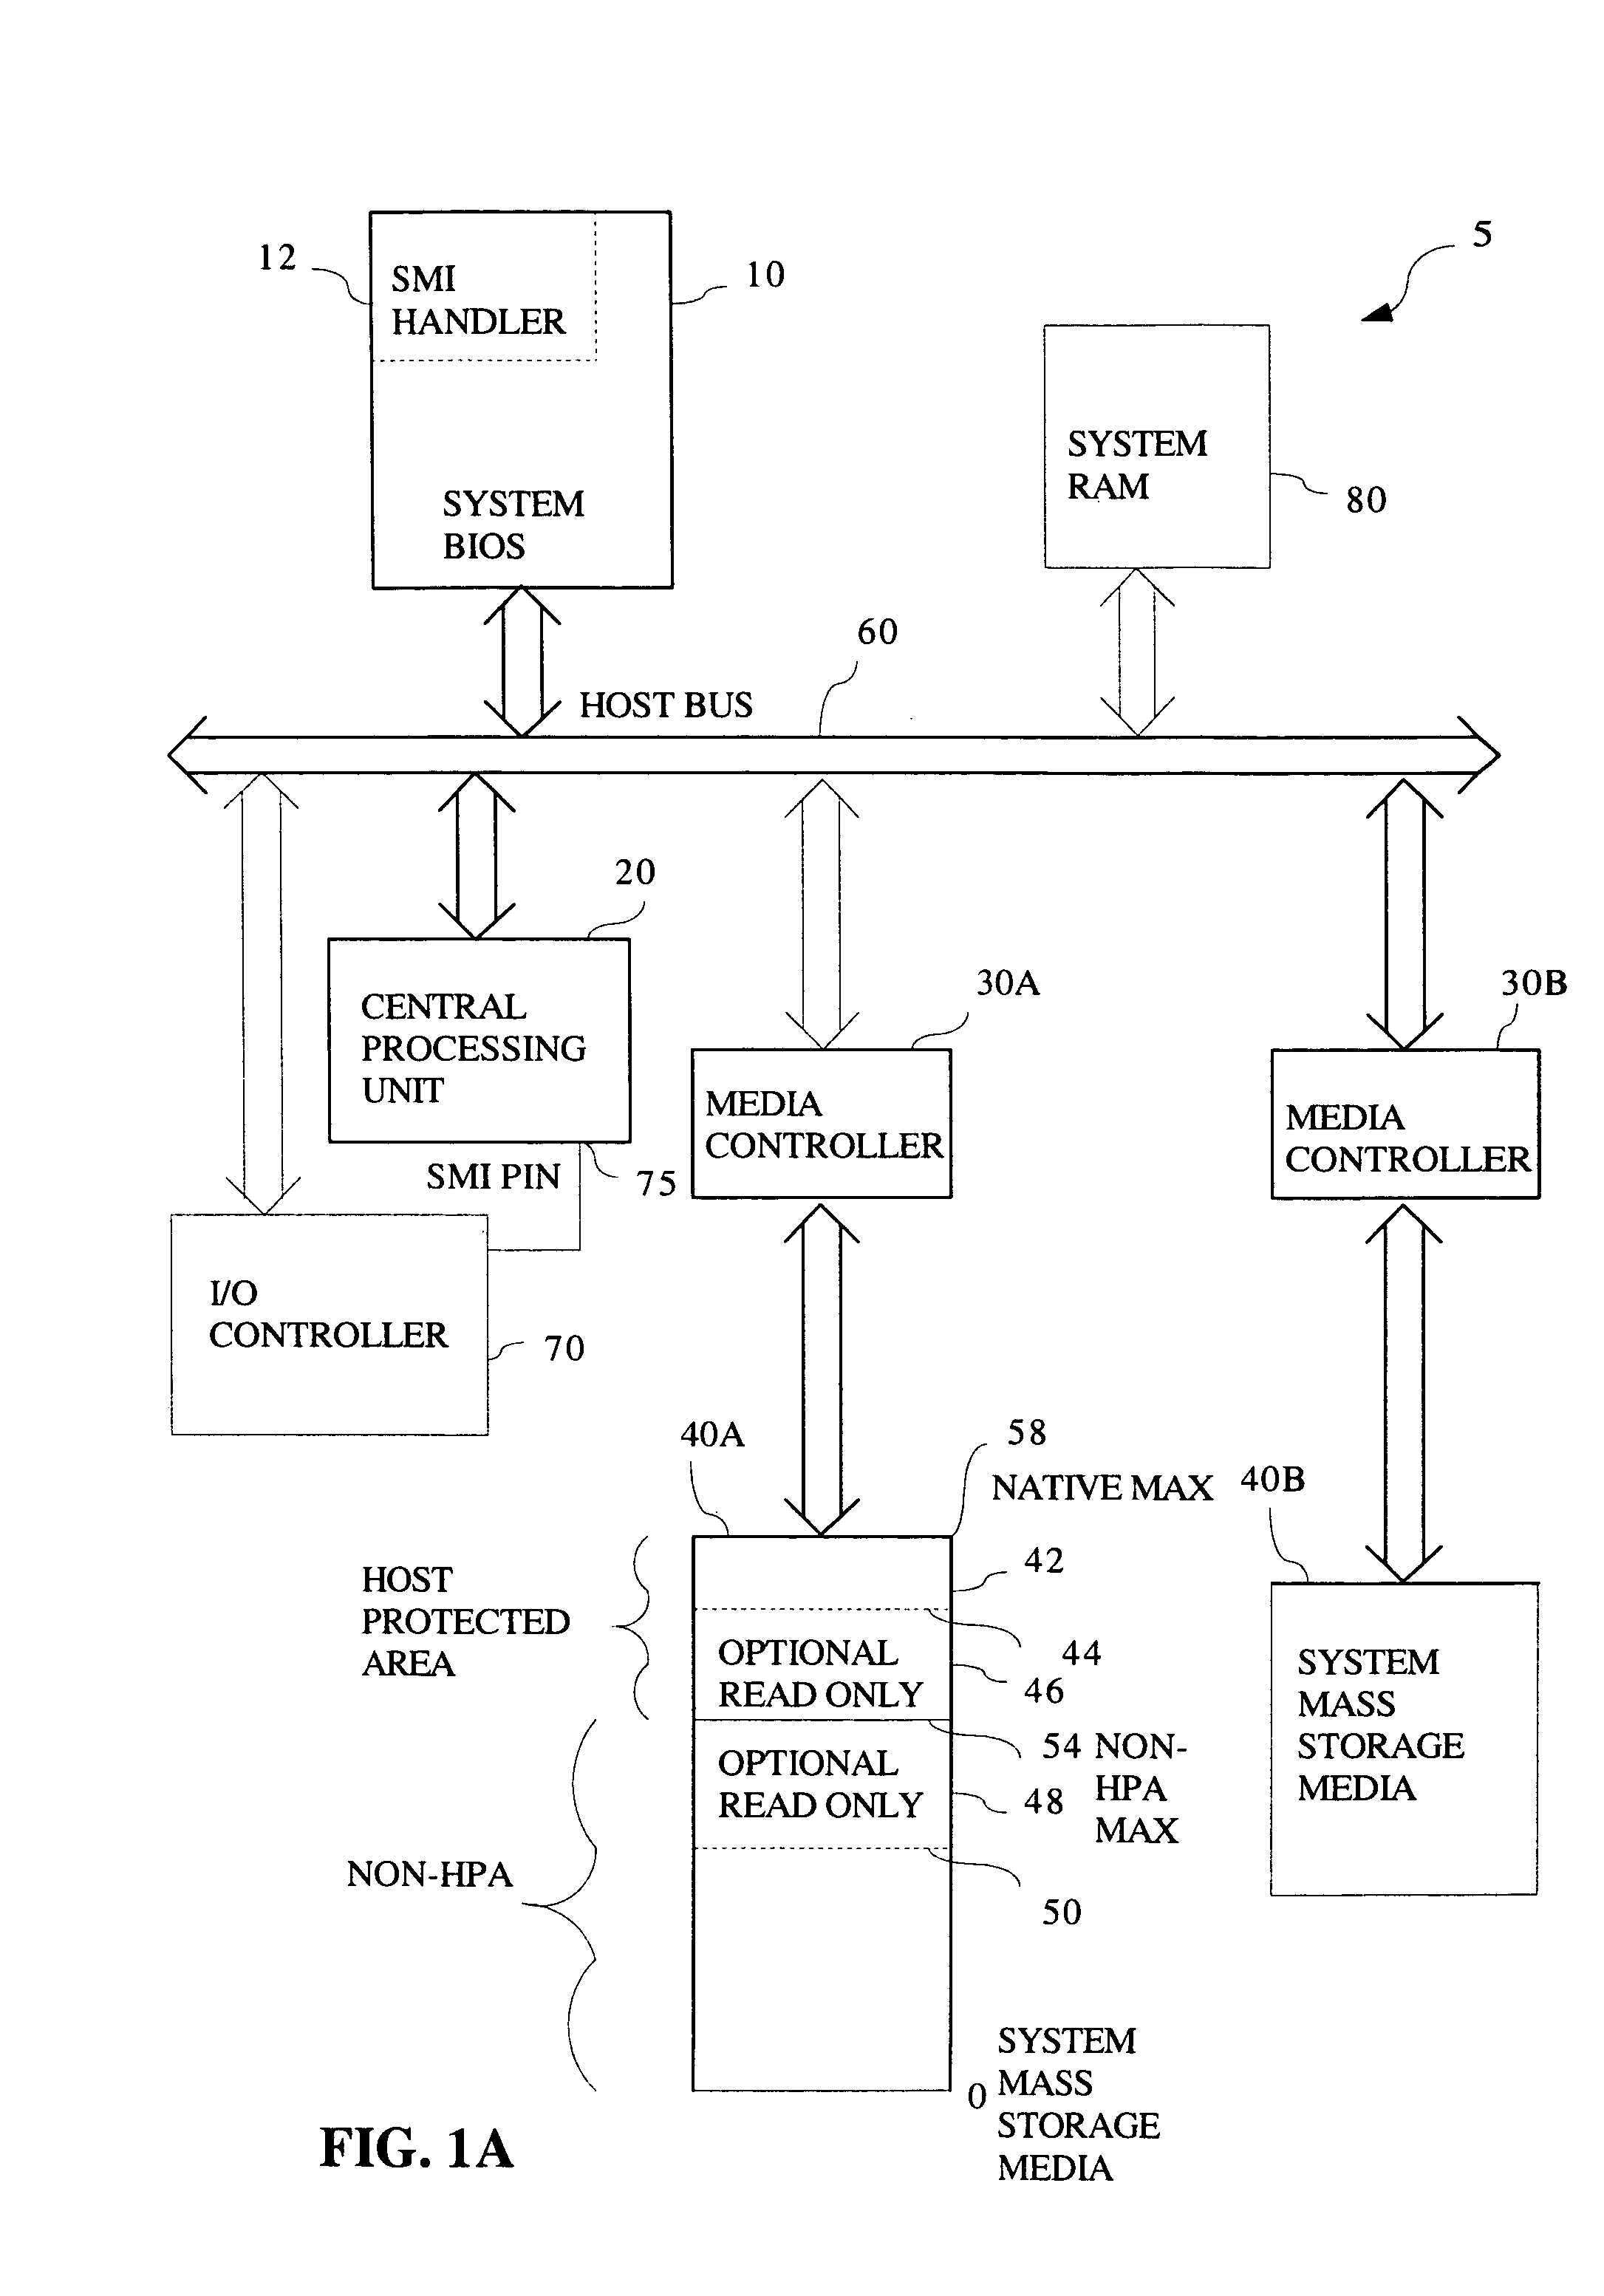 Method and system for changing software access level within or outside a host protected area